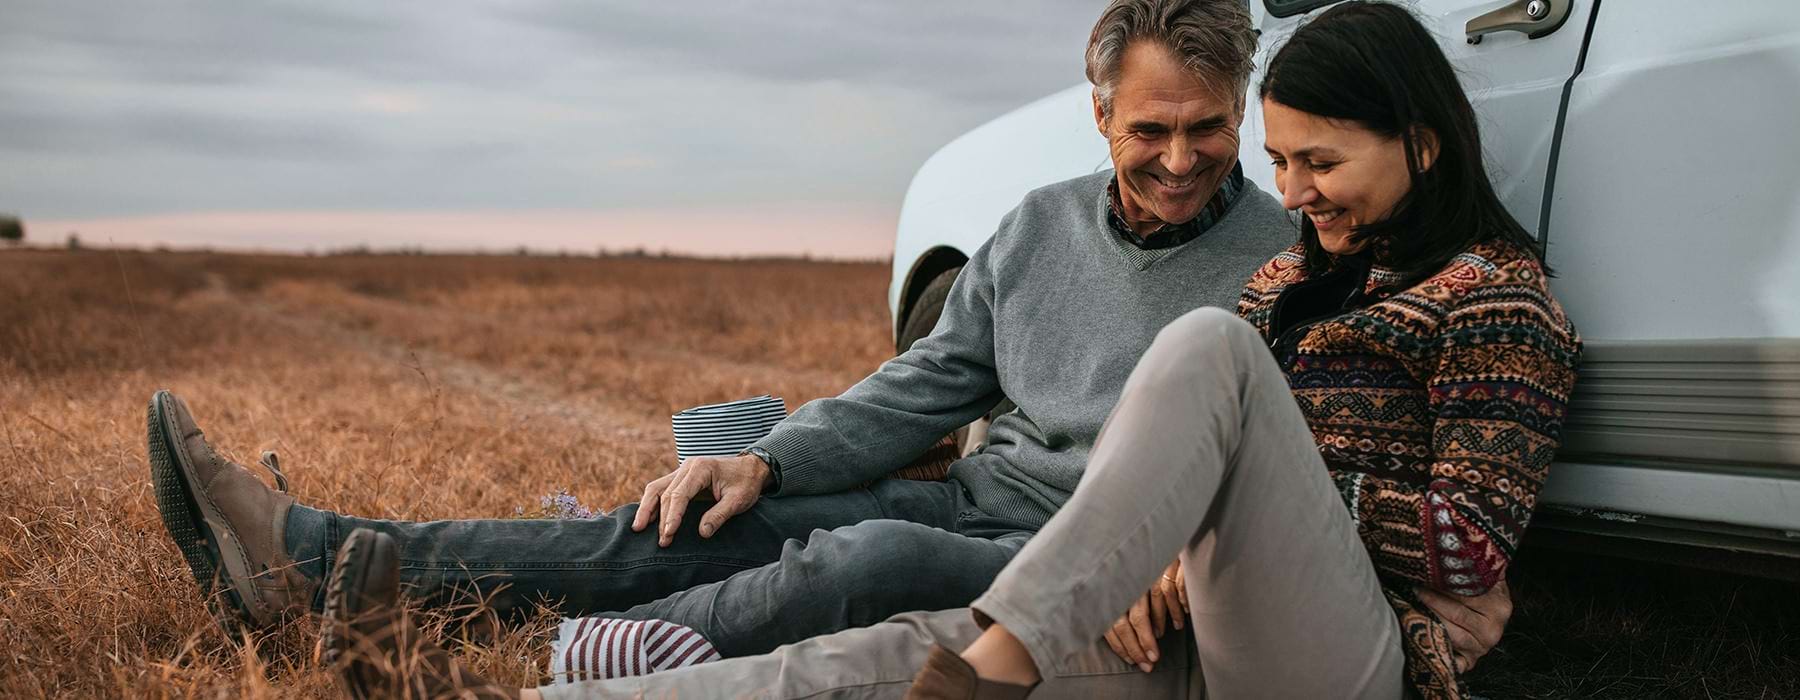 couple relaxing against car in field